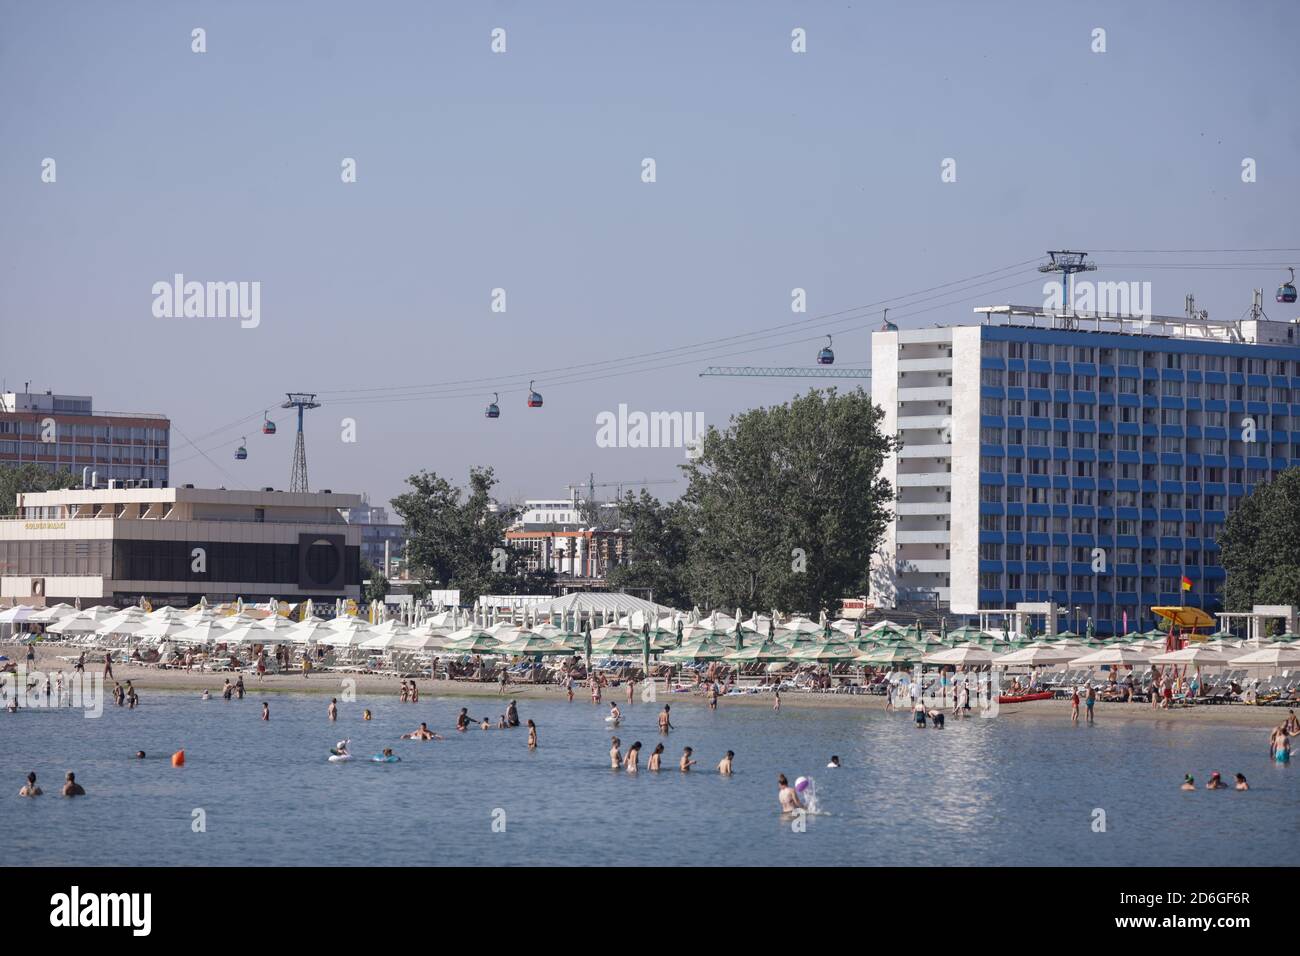 Mamaia, Romania - July 4, 2020: Hotels and people on the Mamaia beach at the Black Sea during the Covid-19 outbreak during a summer day morning. Stock Photo